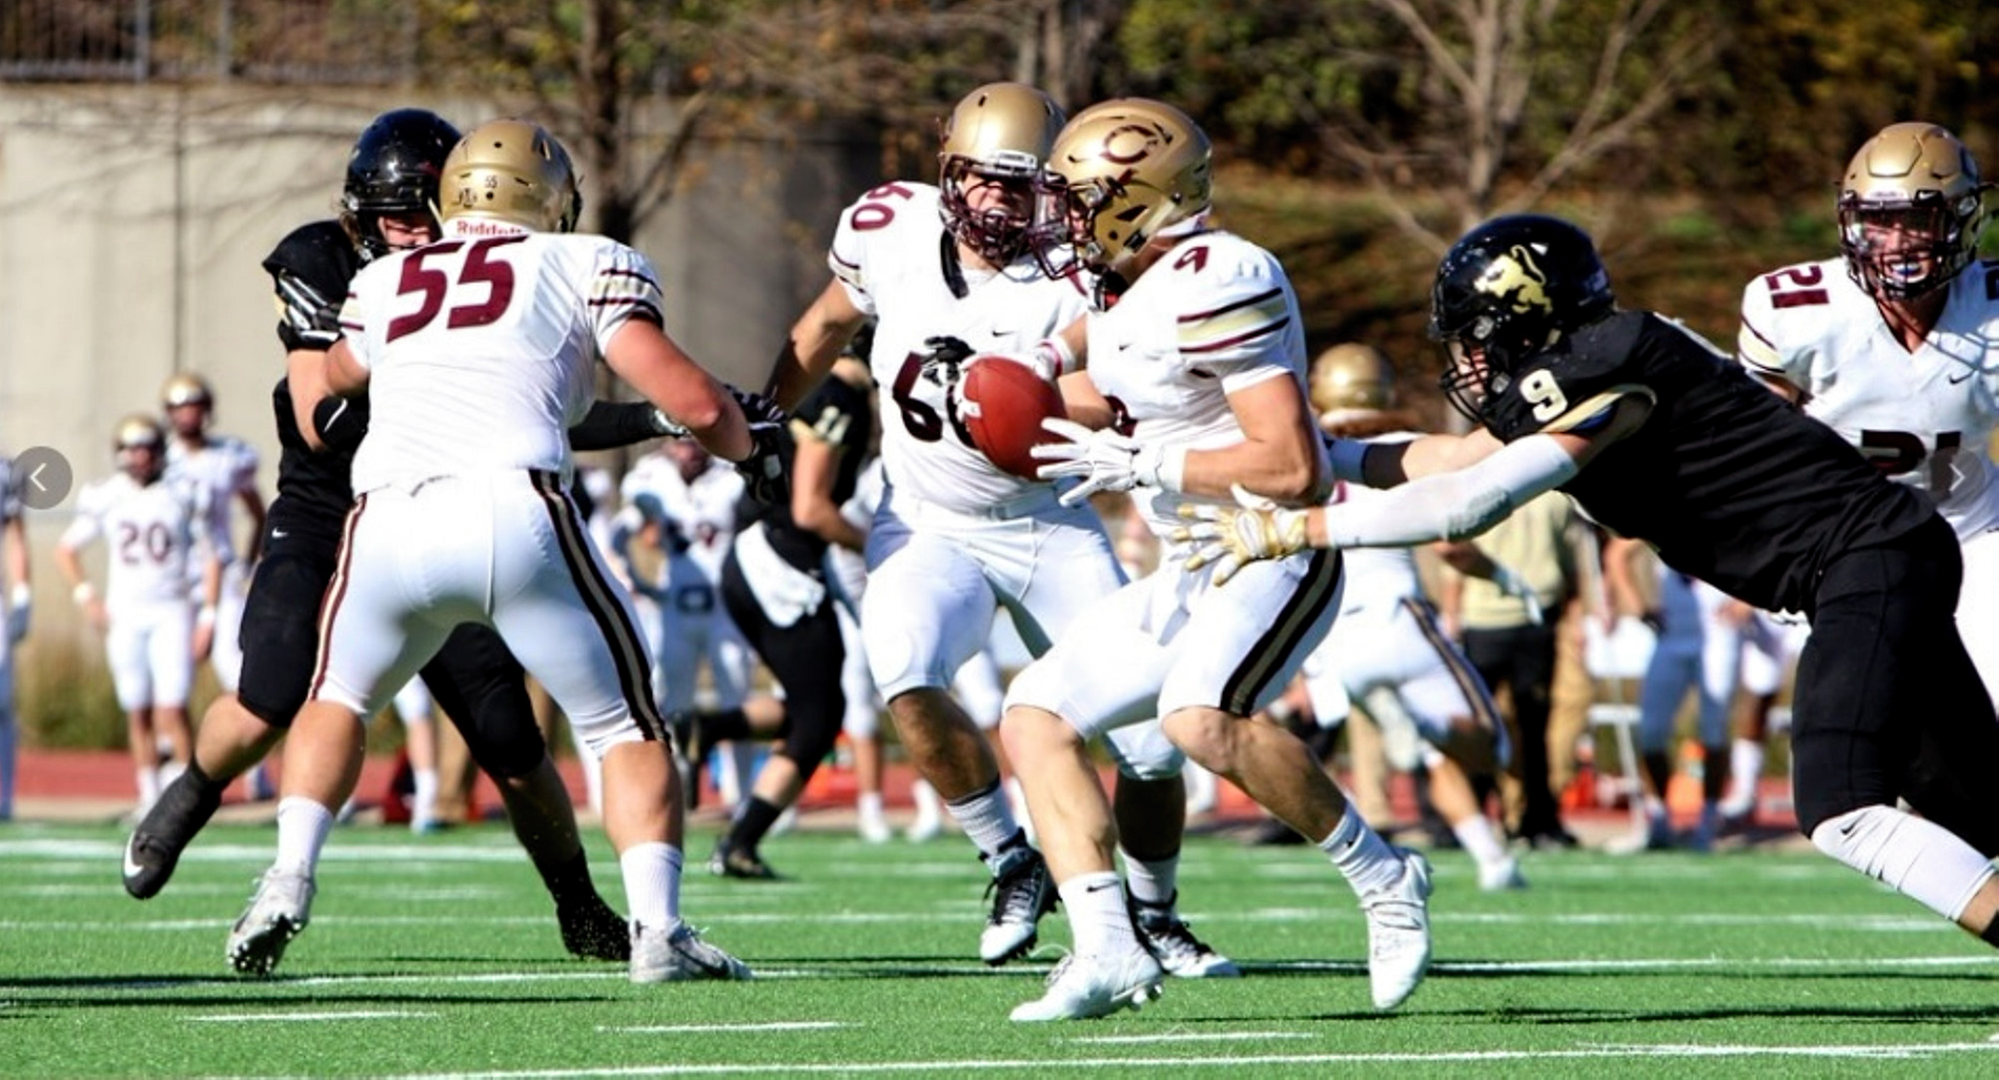 Junior quarterback Michael Herzog looks for running room in the Cobbers' win at St. Olaf (Photo courtesy of St. Olaf Sports Information)